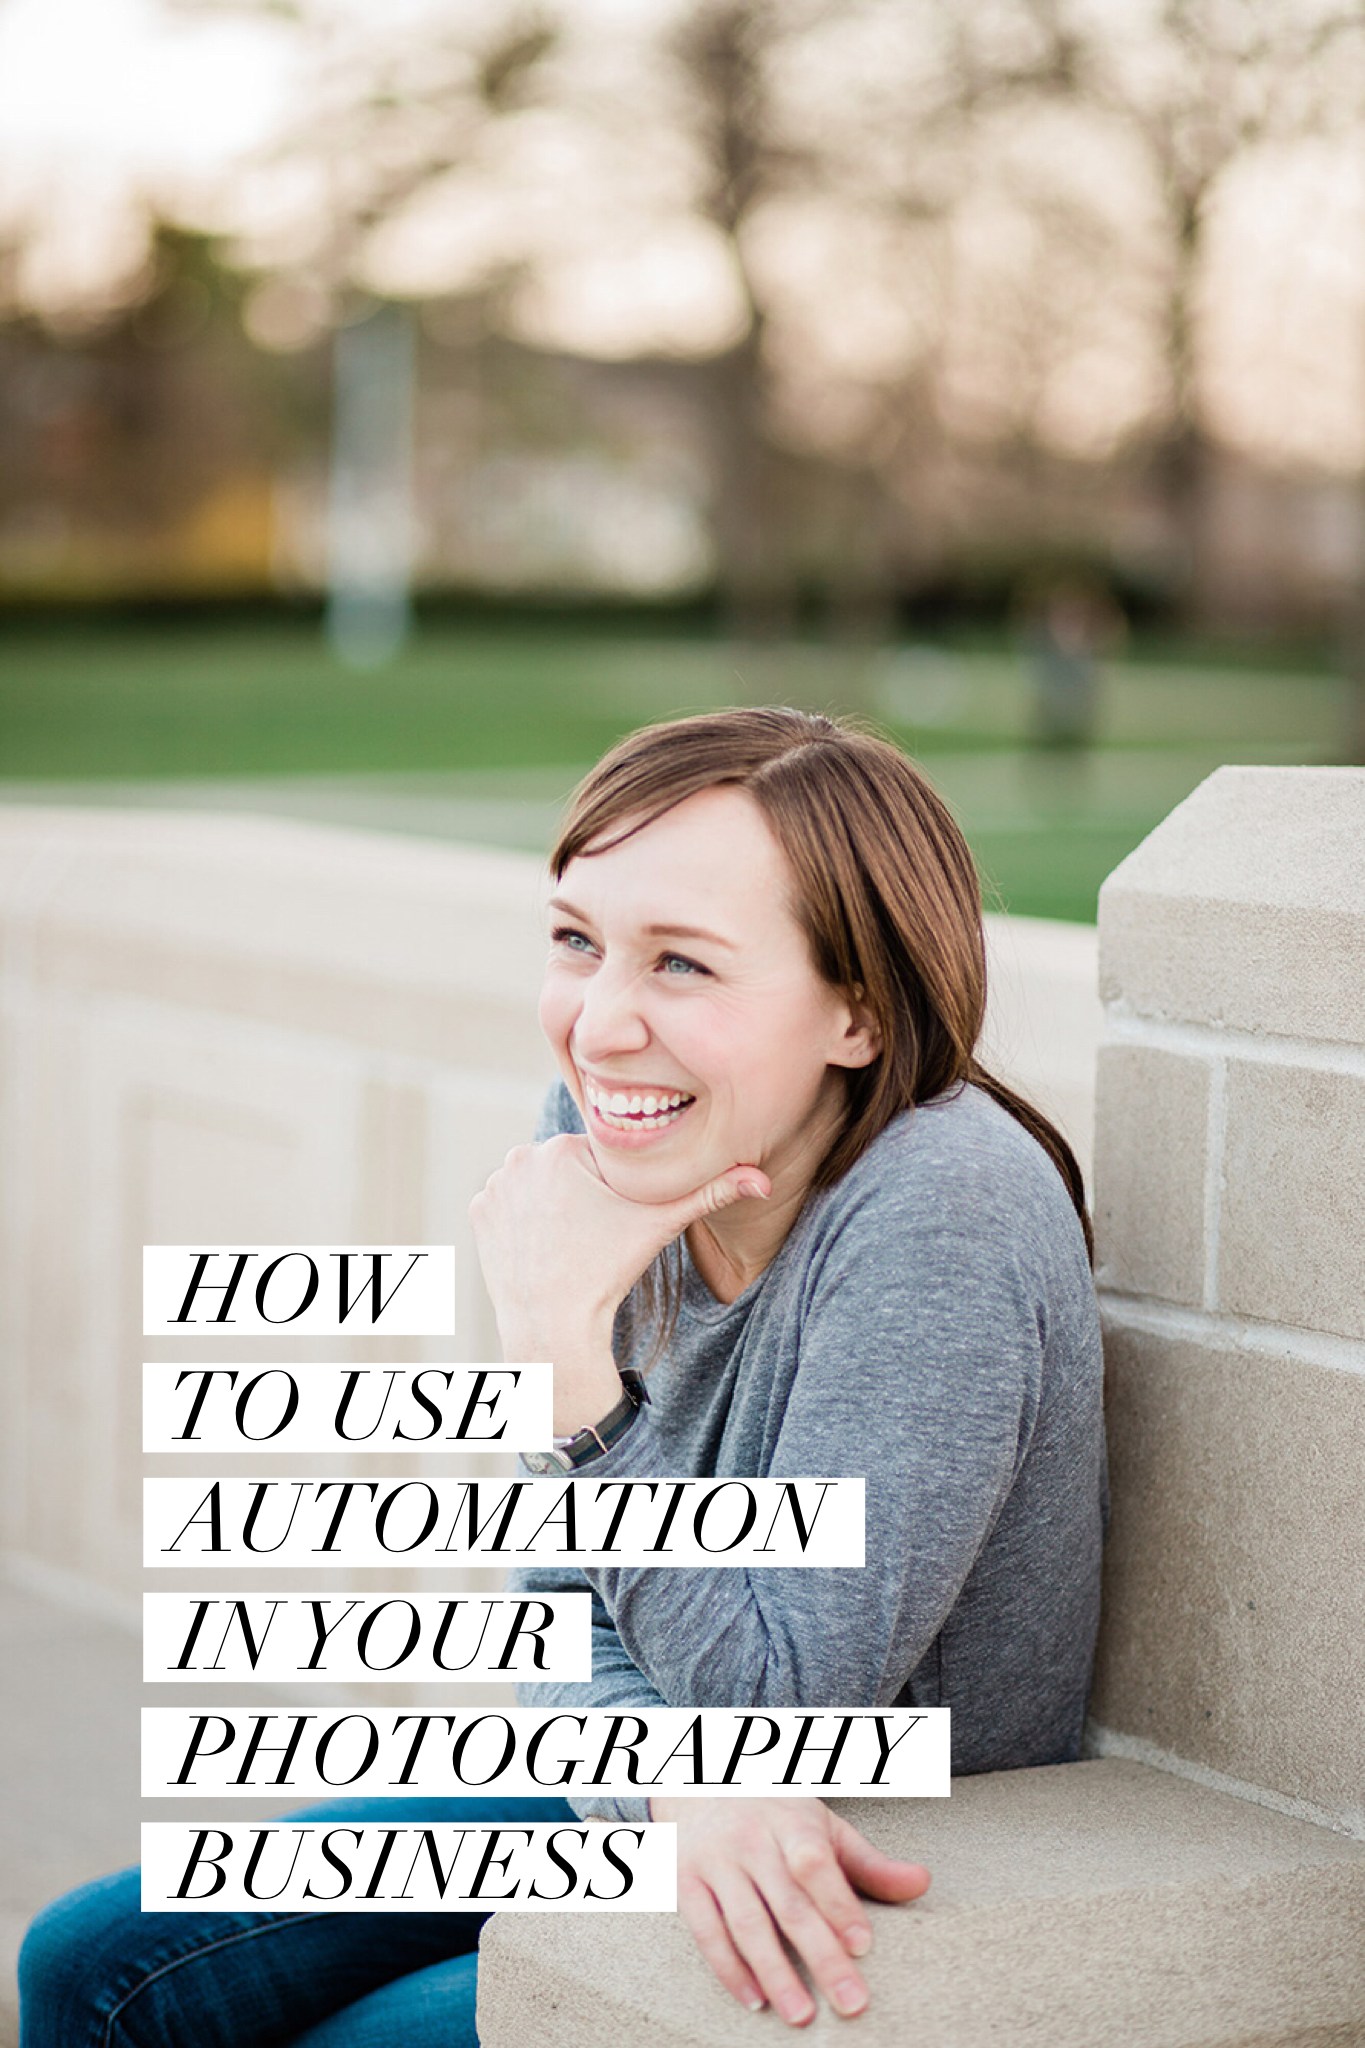 How to use automation in your photography business with Allie Siarto